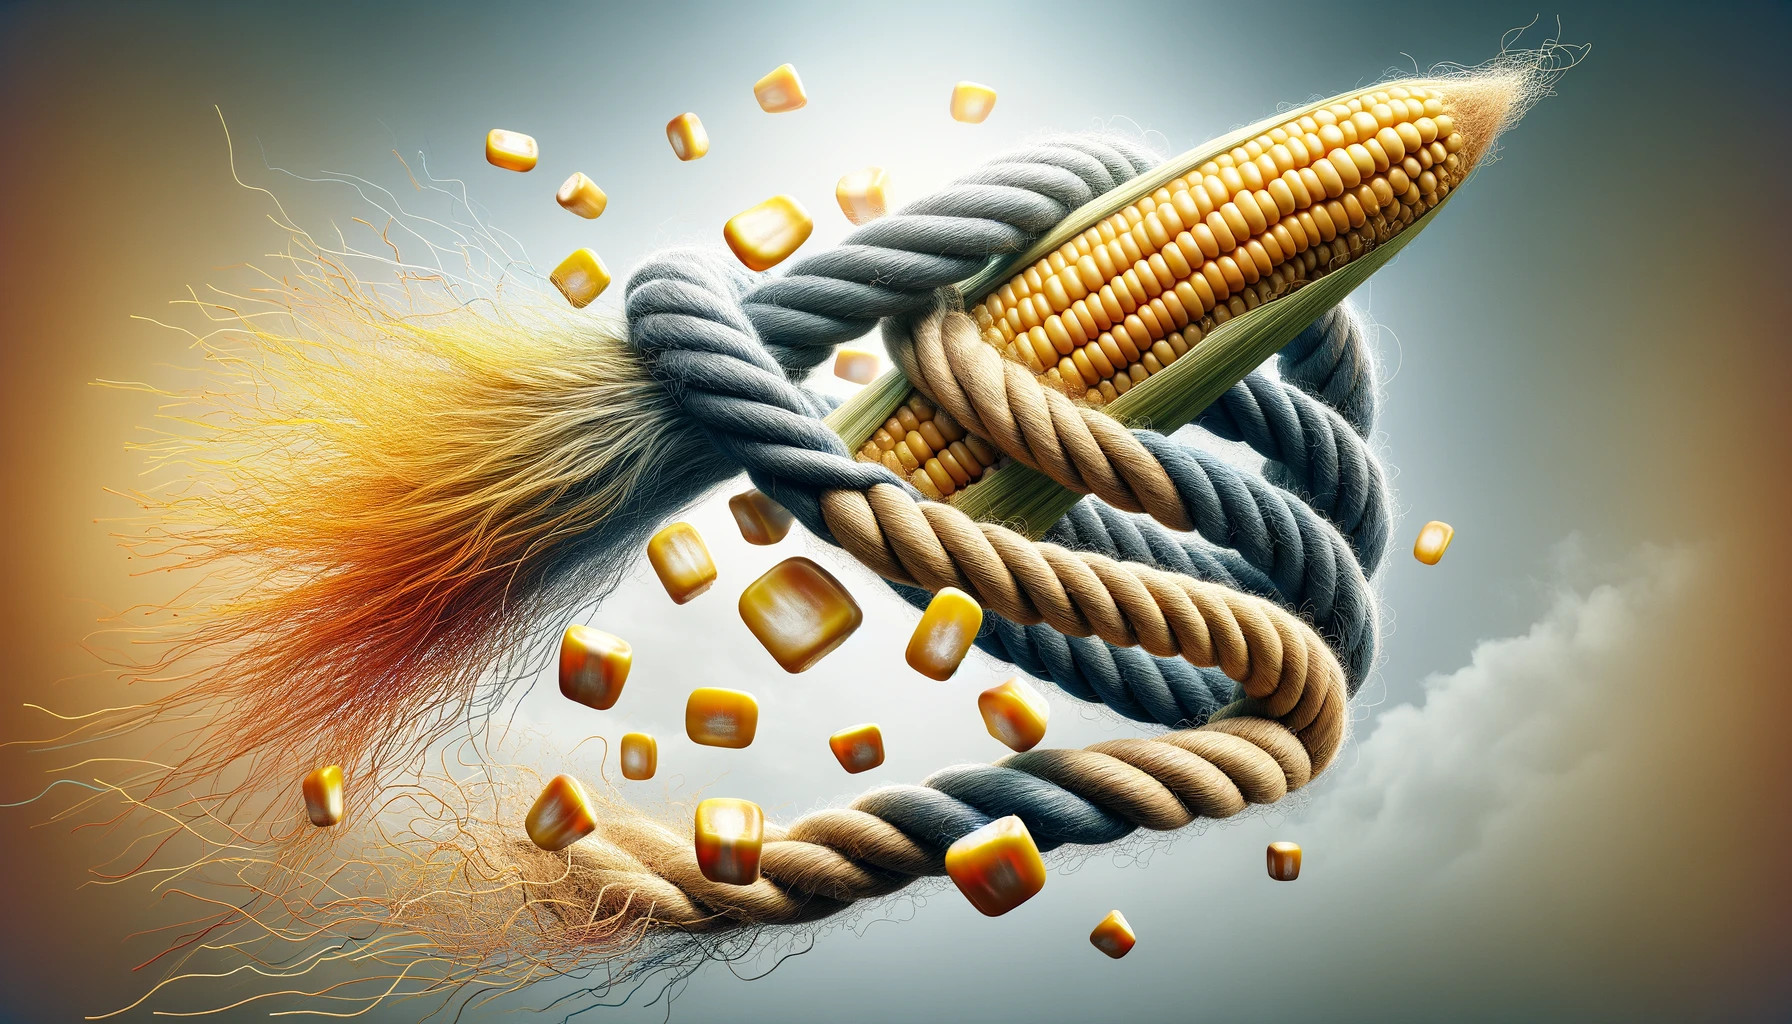 A creative depiction of the fiber content in corn, possibly using visual metaphors like a rope or thread to symbolize strength and connectivity in digestion.